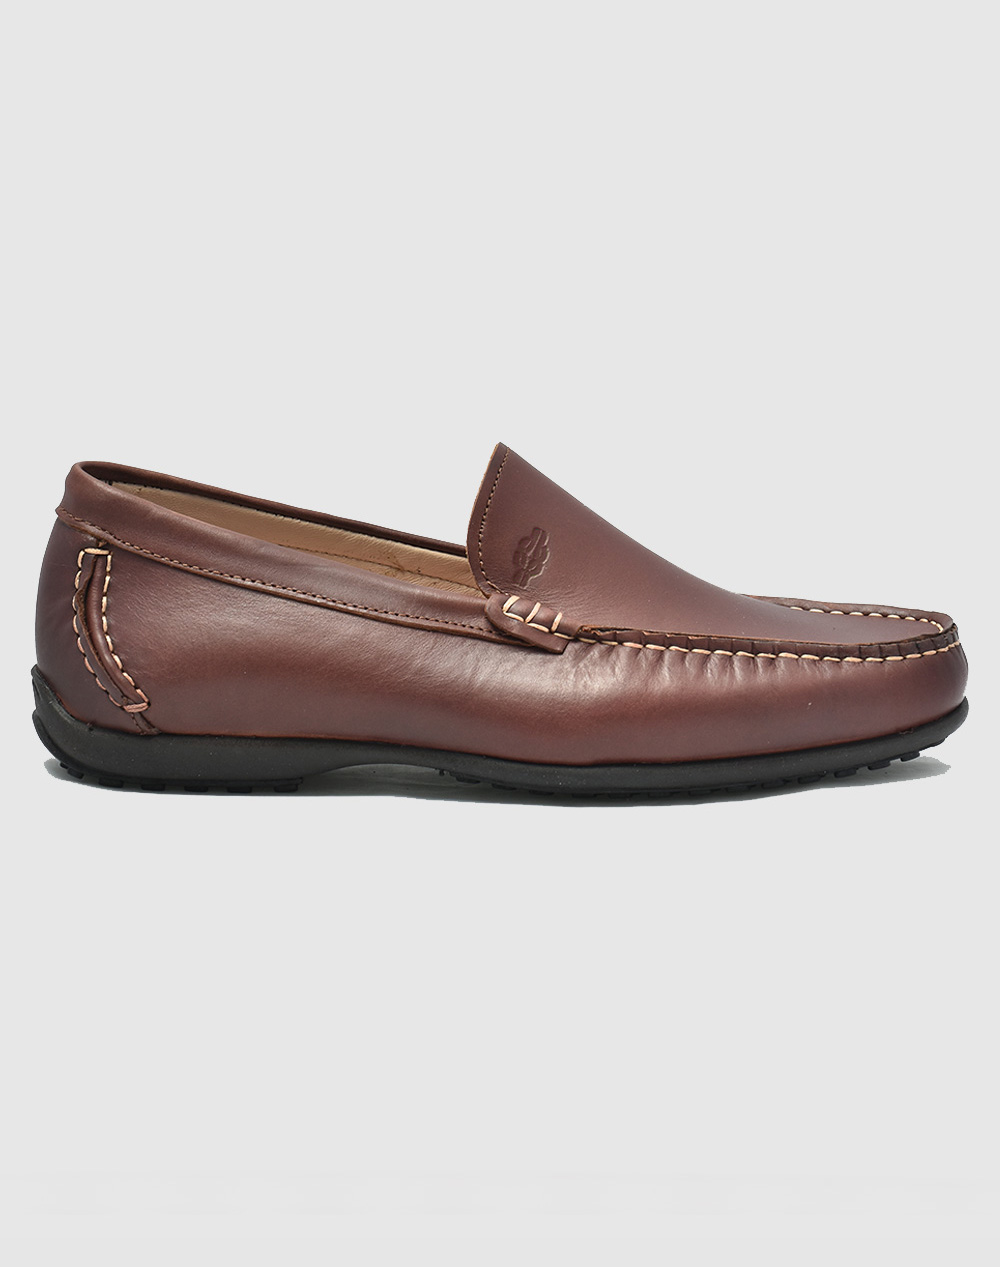 CHICAGO SHOES 124-5.0947-2085-TABAC Brown